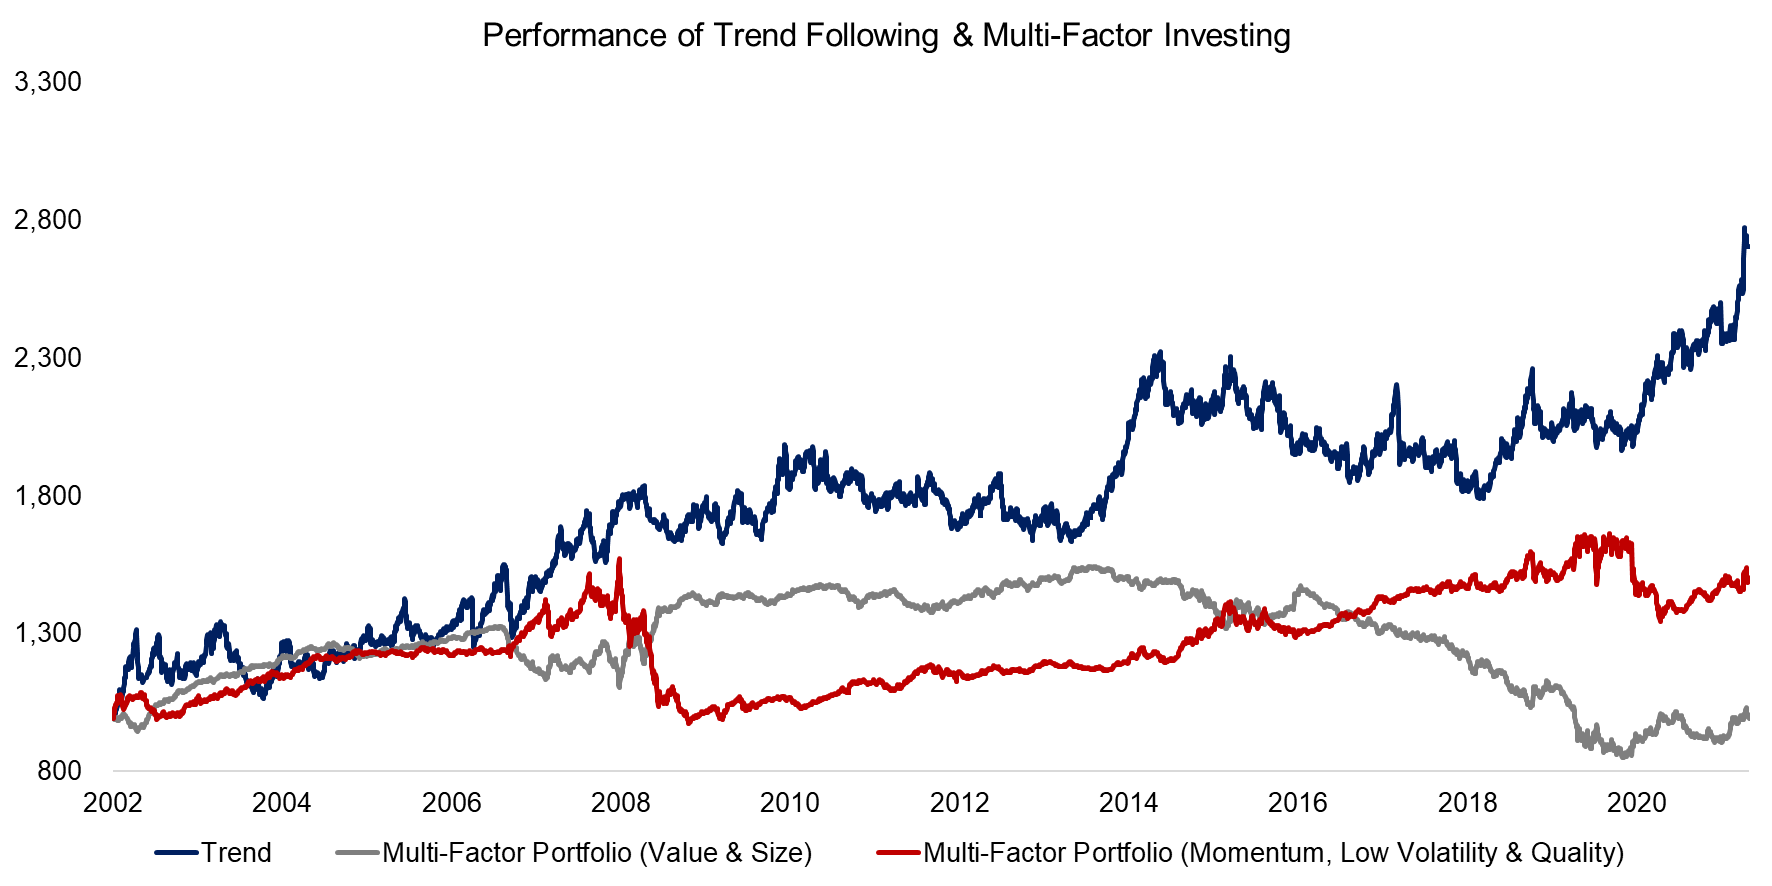 Performance of Trend Following & Multi-Factor Investing